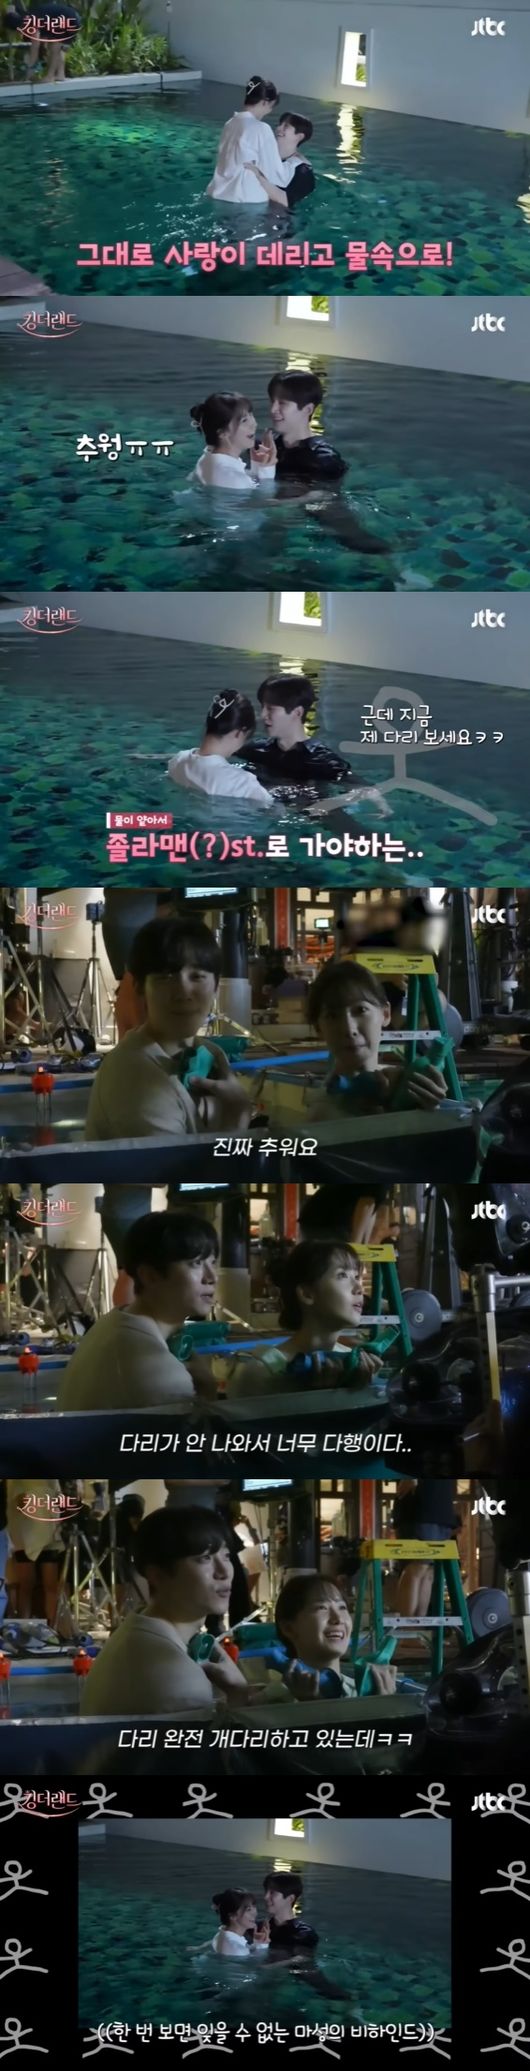 King the Land Lee Joon-ho, Im Yoon-ah reveals secret of swimming pool kissing scene taken in ThailandOn the 20th YouTube channel JTBC Drama, MeiKing video of the Saturday drama King the Land was uploaded.In the video released, friends of Lee Joon-ho and Im Yoon-ah caught the eye with a behind-the-scenes behind-the-scenes photo of Thailand leaving Insen Trip.The two rehearsed for a pool kiss scene before the full-scale shooting, and Lee Joon-ho practiced the scene of taking Im Yoon-ahs waist into the pool.Im Yoon-ah, who entered the water, said, Its cold. Lee Joon-ho took a stance to match Im Yoon-ah and laughed, Look at my legs now.During a short break, the couple melted the cold with a hot pack and found a MeiKing camera.Lee Joon-ho said, Now we are shooting at Thailand pool but it is really cold. And I am so glad that my legs are not coming out.Im Yoon-ah also said, I should have dived and caught my legs once, and Lee Joon-ho added, Im doing my legs completely.Thanks to the efforts of Lee Joon-ho and Im Yoon-ah, the romantic swimming pool kiss scene was completed in the last 10 episodes and collected a big topic.JTBC drama King the Land captures MeiKing